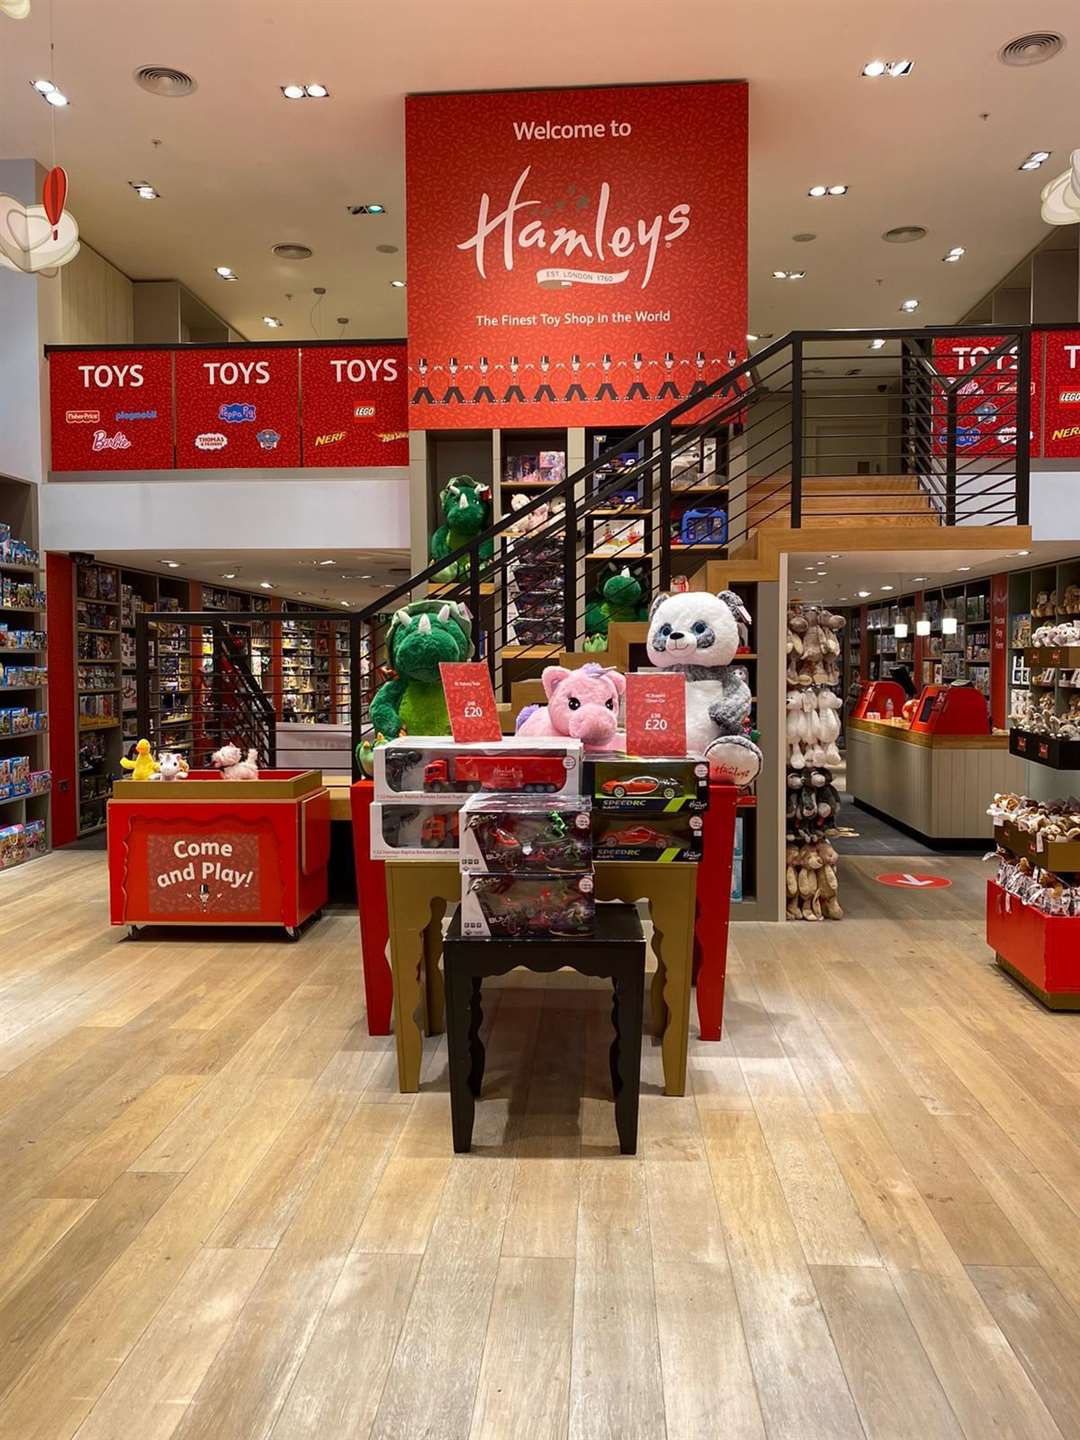 Hamleys in Bluewater opens again on Monday with a giveaway goody bag for the first 10 customers